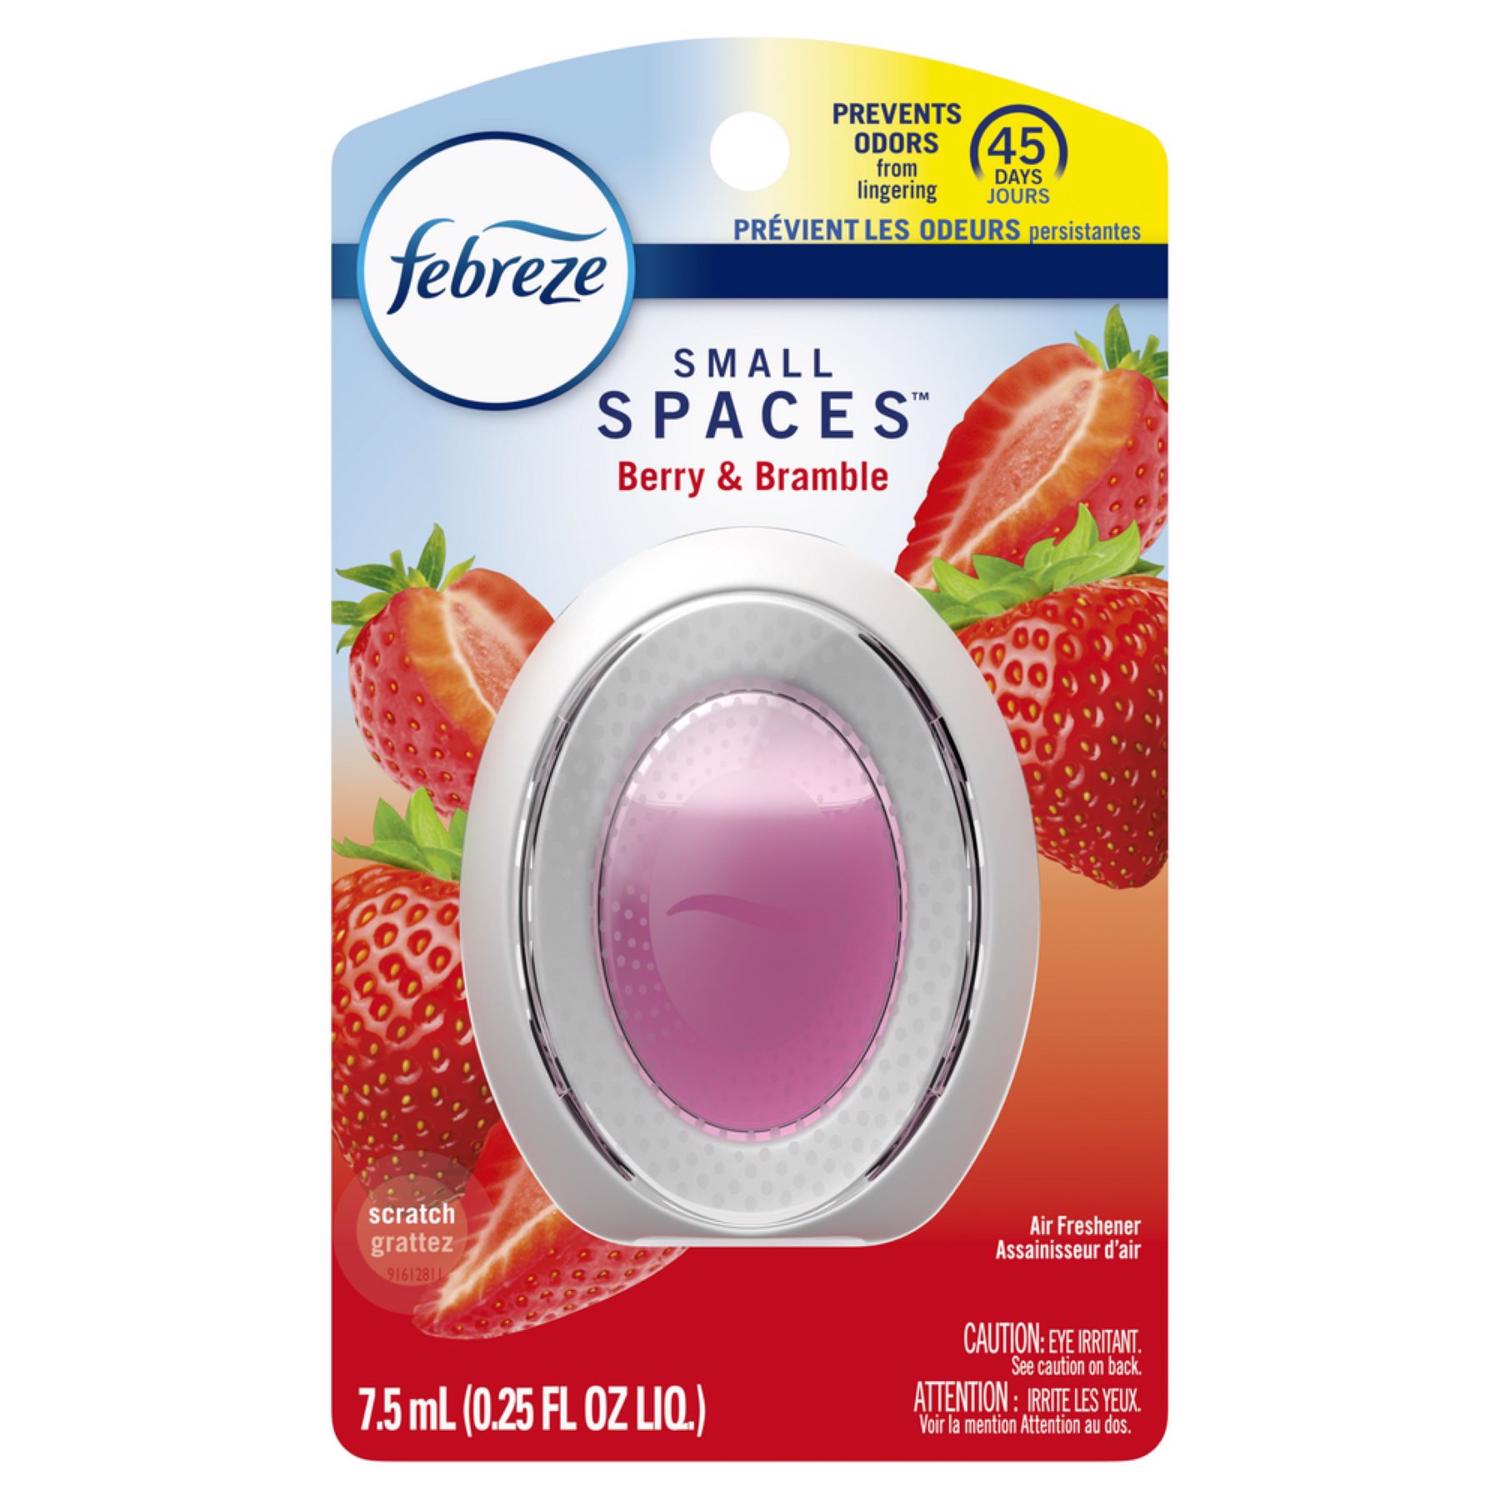 Febreze Air Effects Spring and Renewal Scent Air Freshener 8.8 oz Aerosol -  Ace Hardware